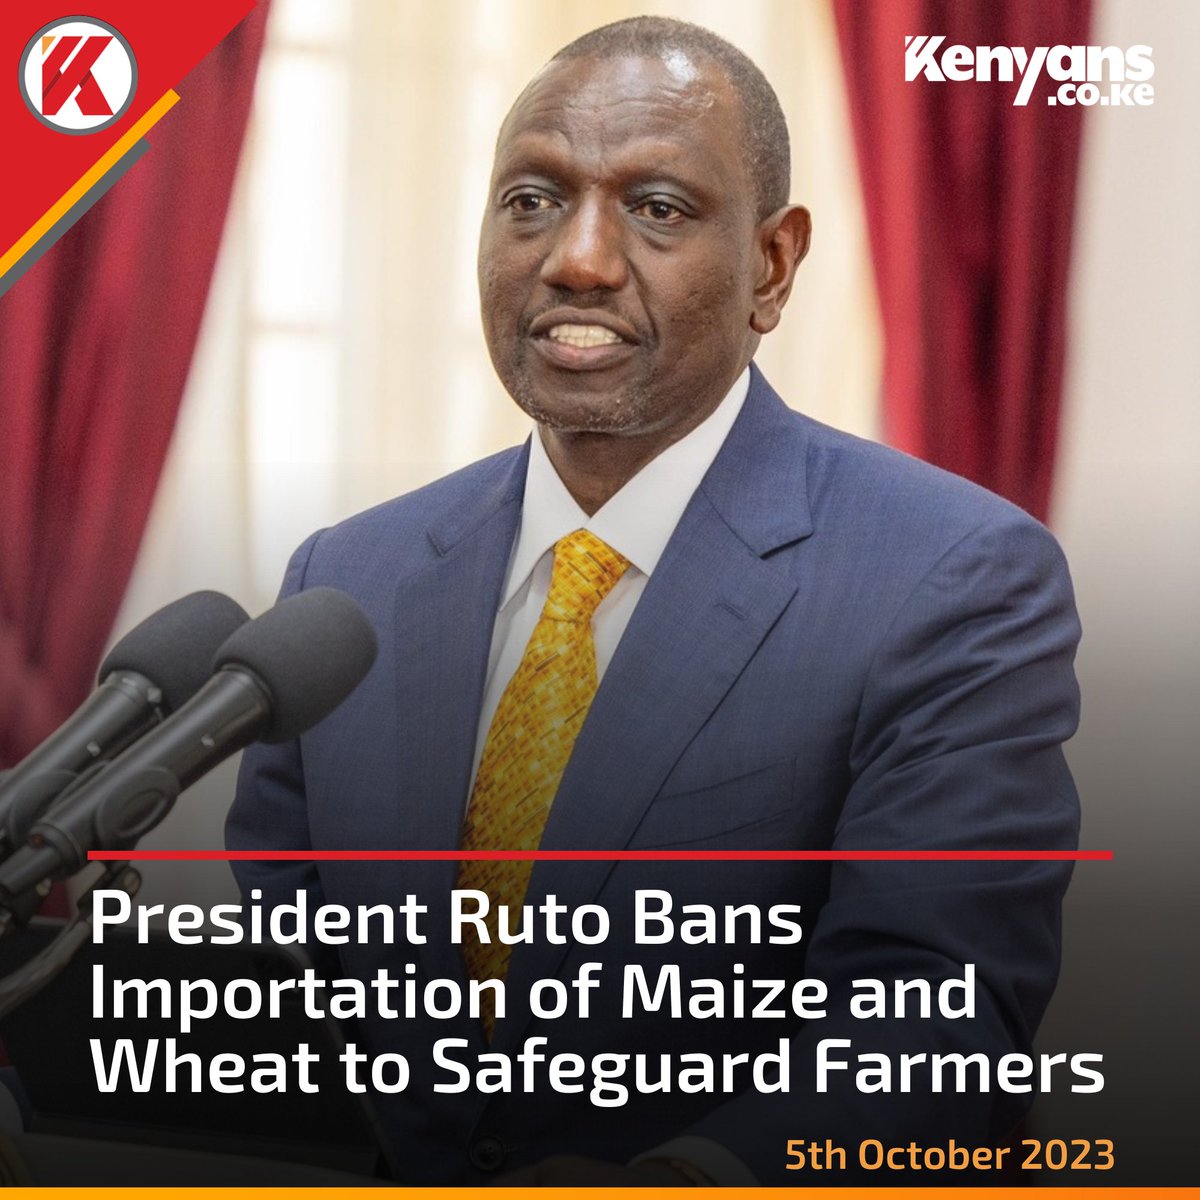 President Ruto bans importation of maize and wheat